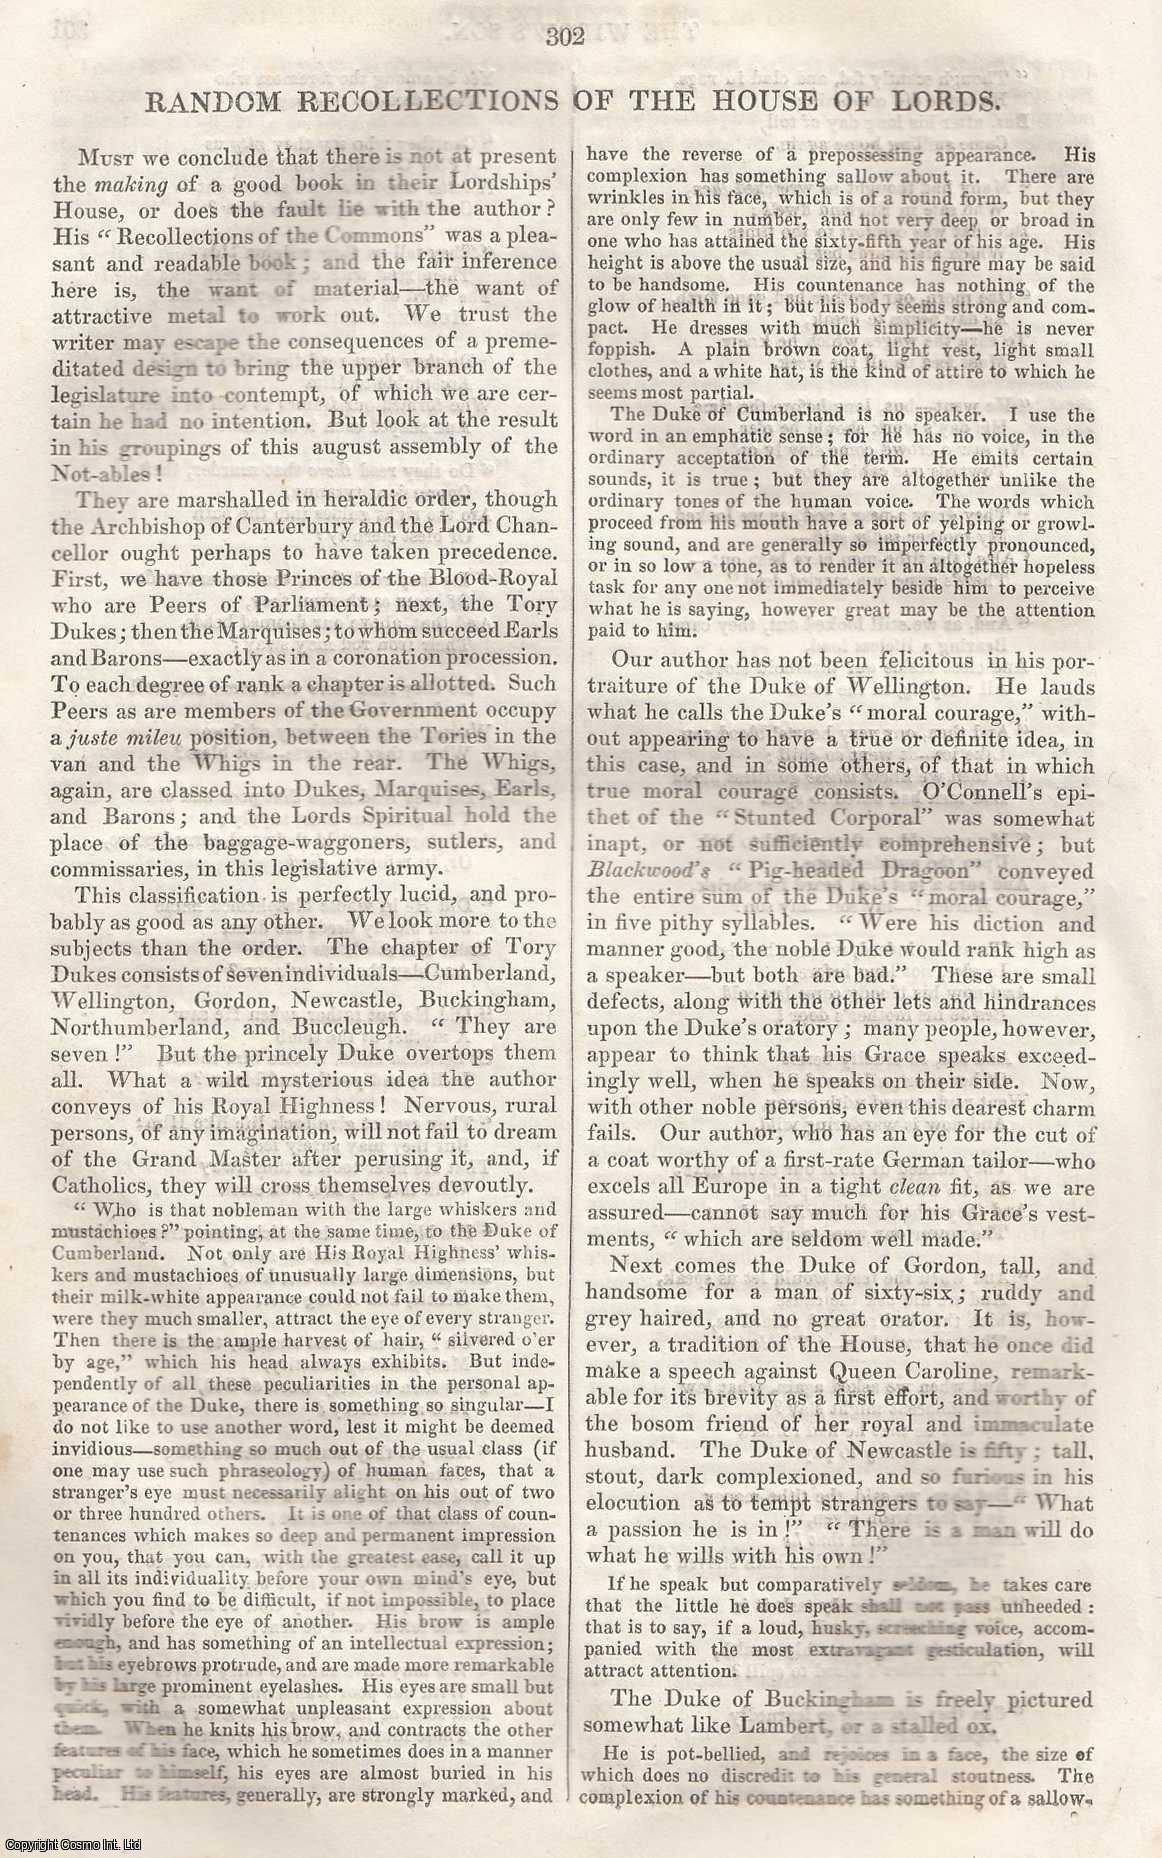 --- - Random Recollections of The House of Lords [By James Grant]. An original article from Tait's Edinburgh Magazine, 1836.